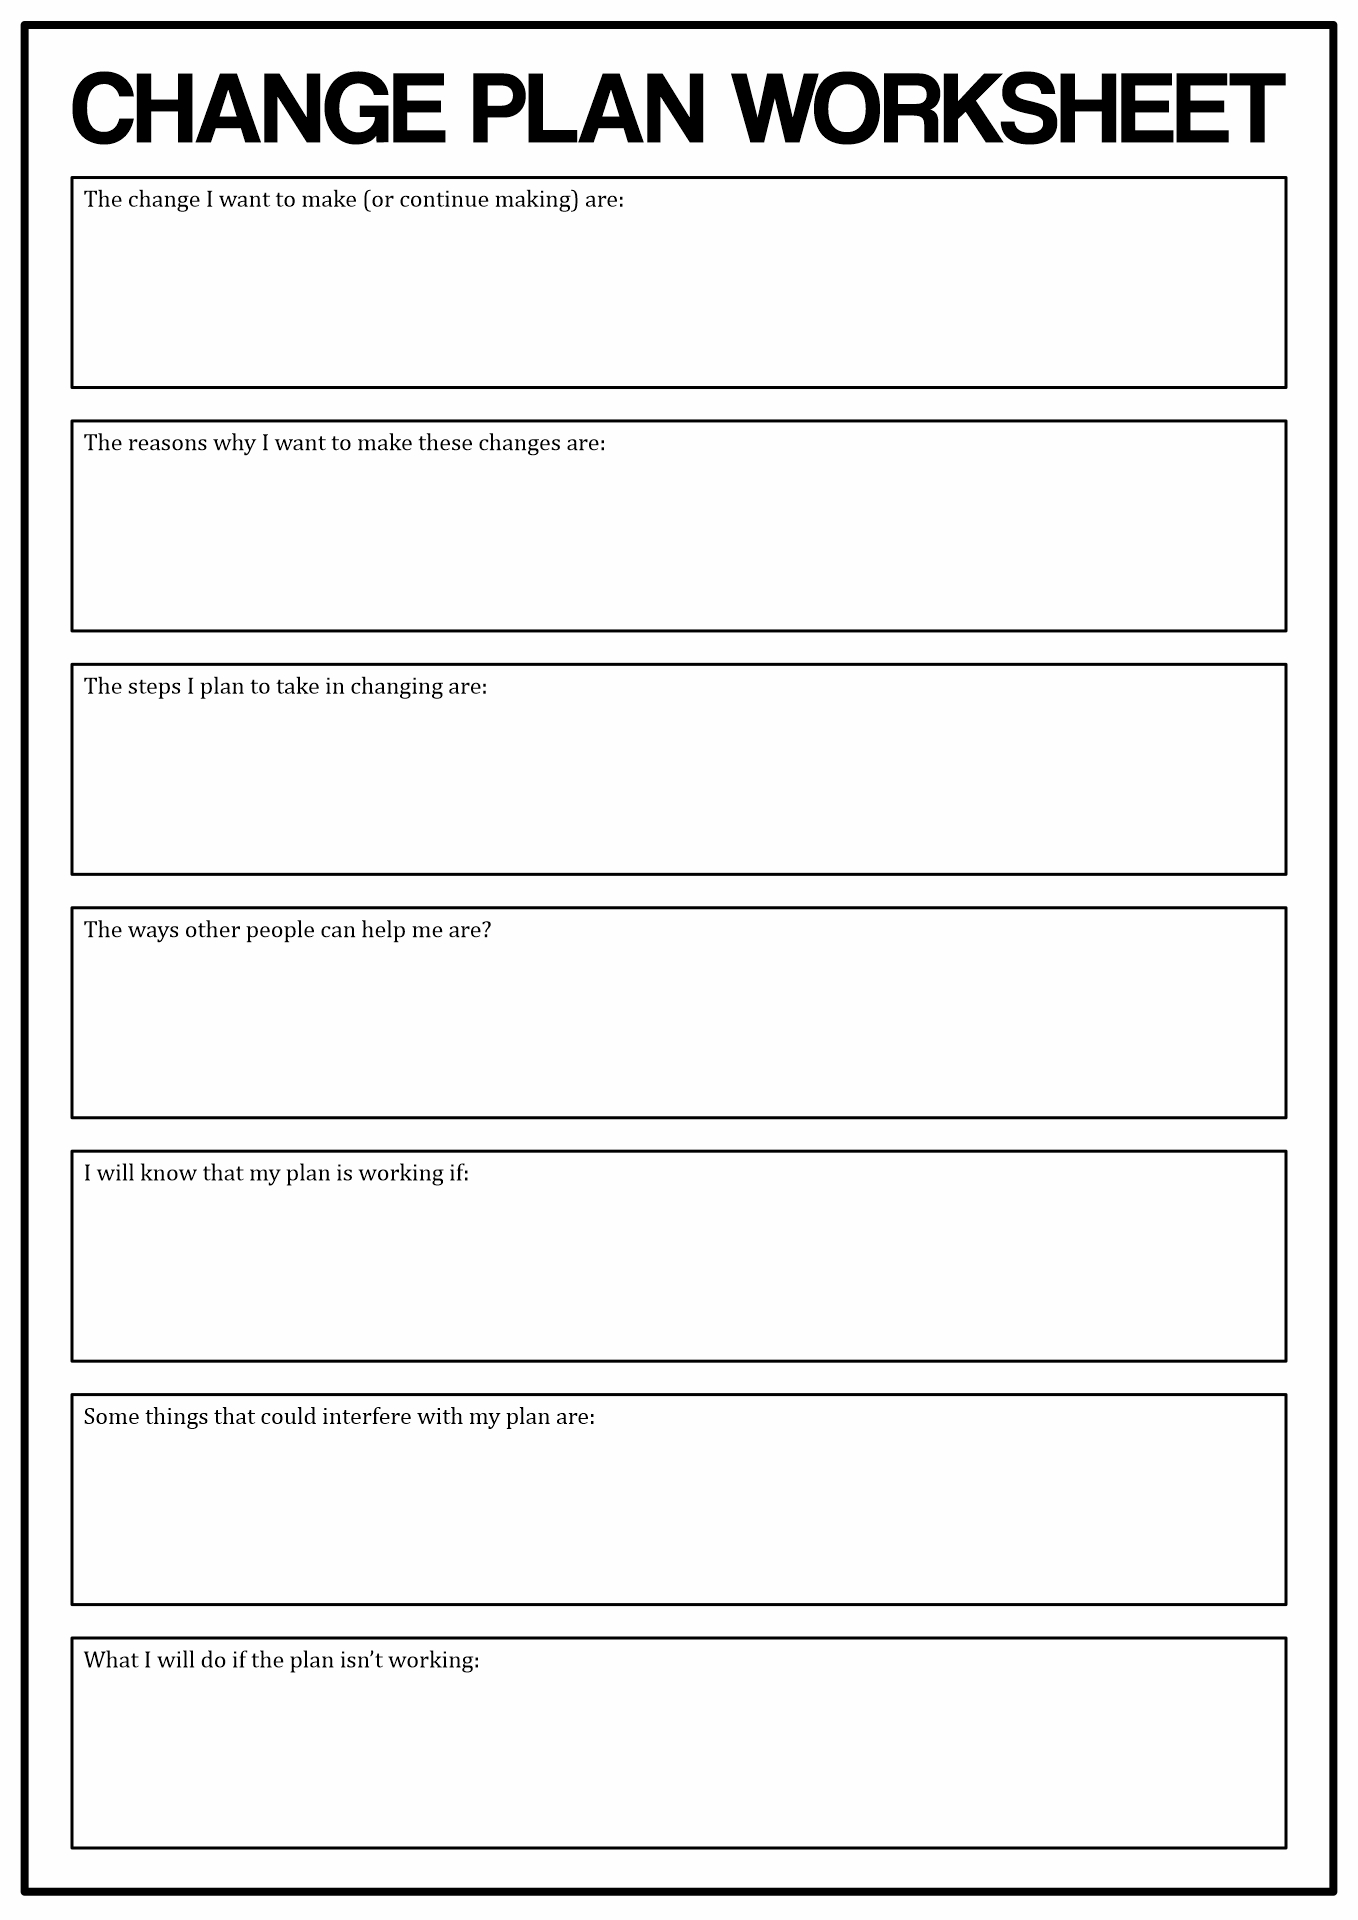 Motivational Interviewing Stages of Change Worksheet